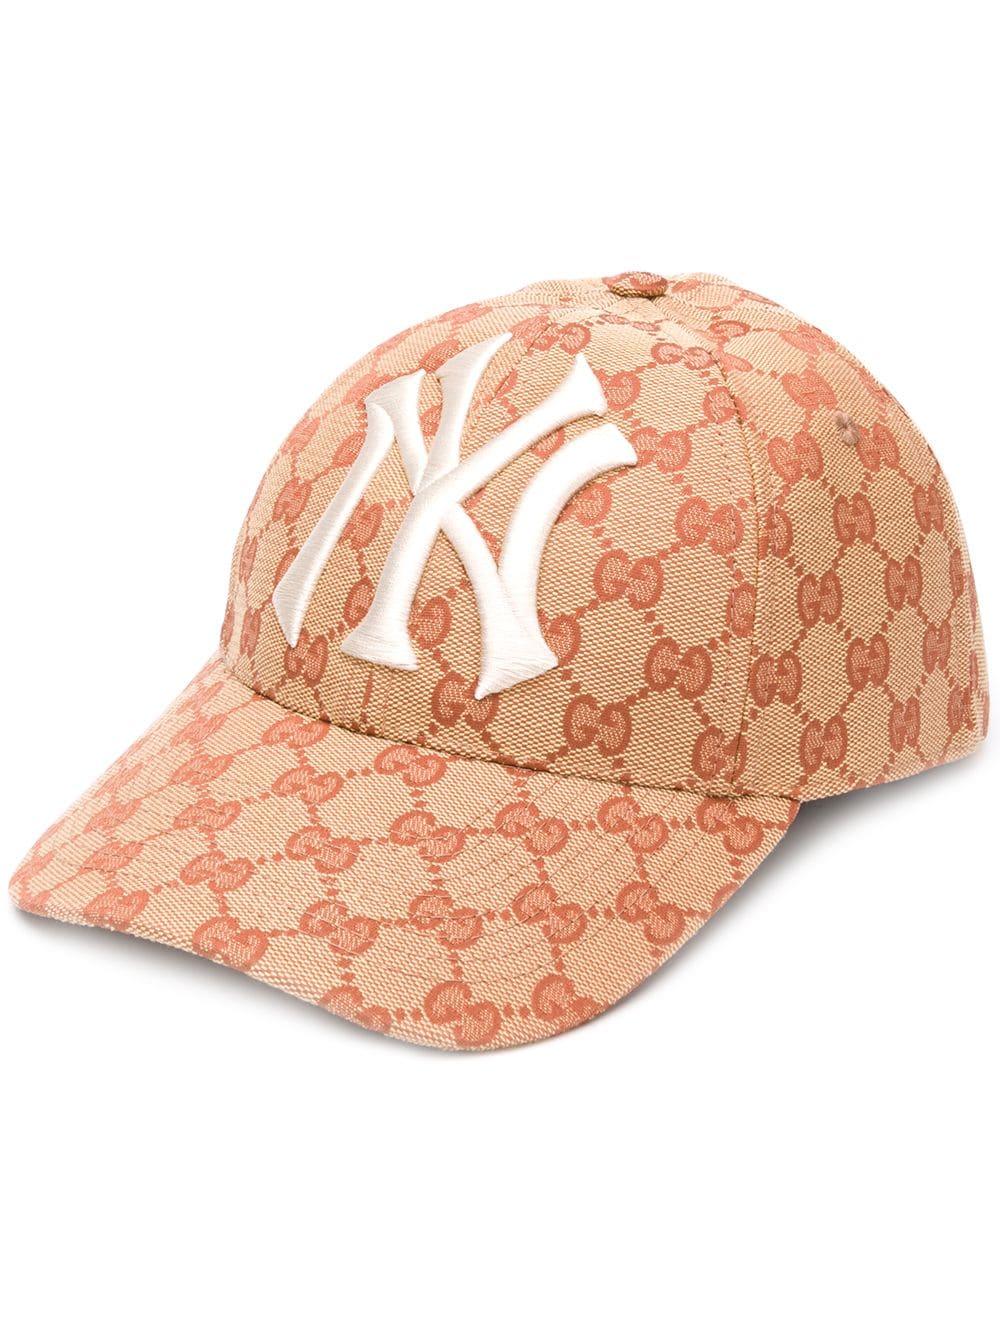 Udvinding skrubbe ansvar Gucci Canvas Baseball Hat With Ny Yankees Patch in Beige (Natural) - Lyst